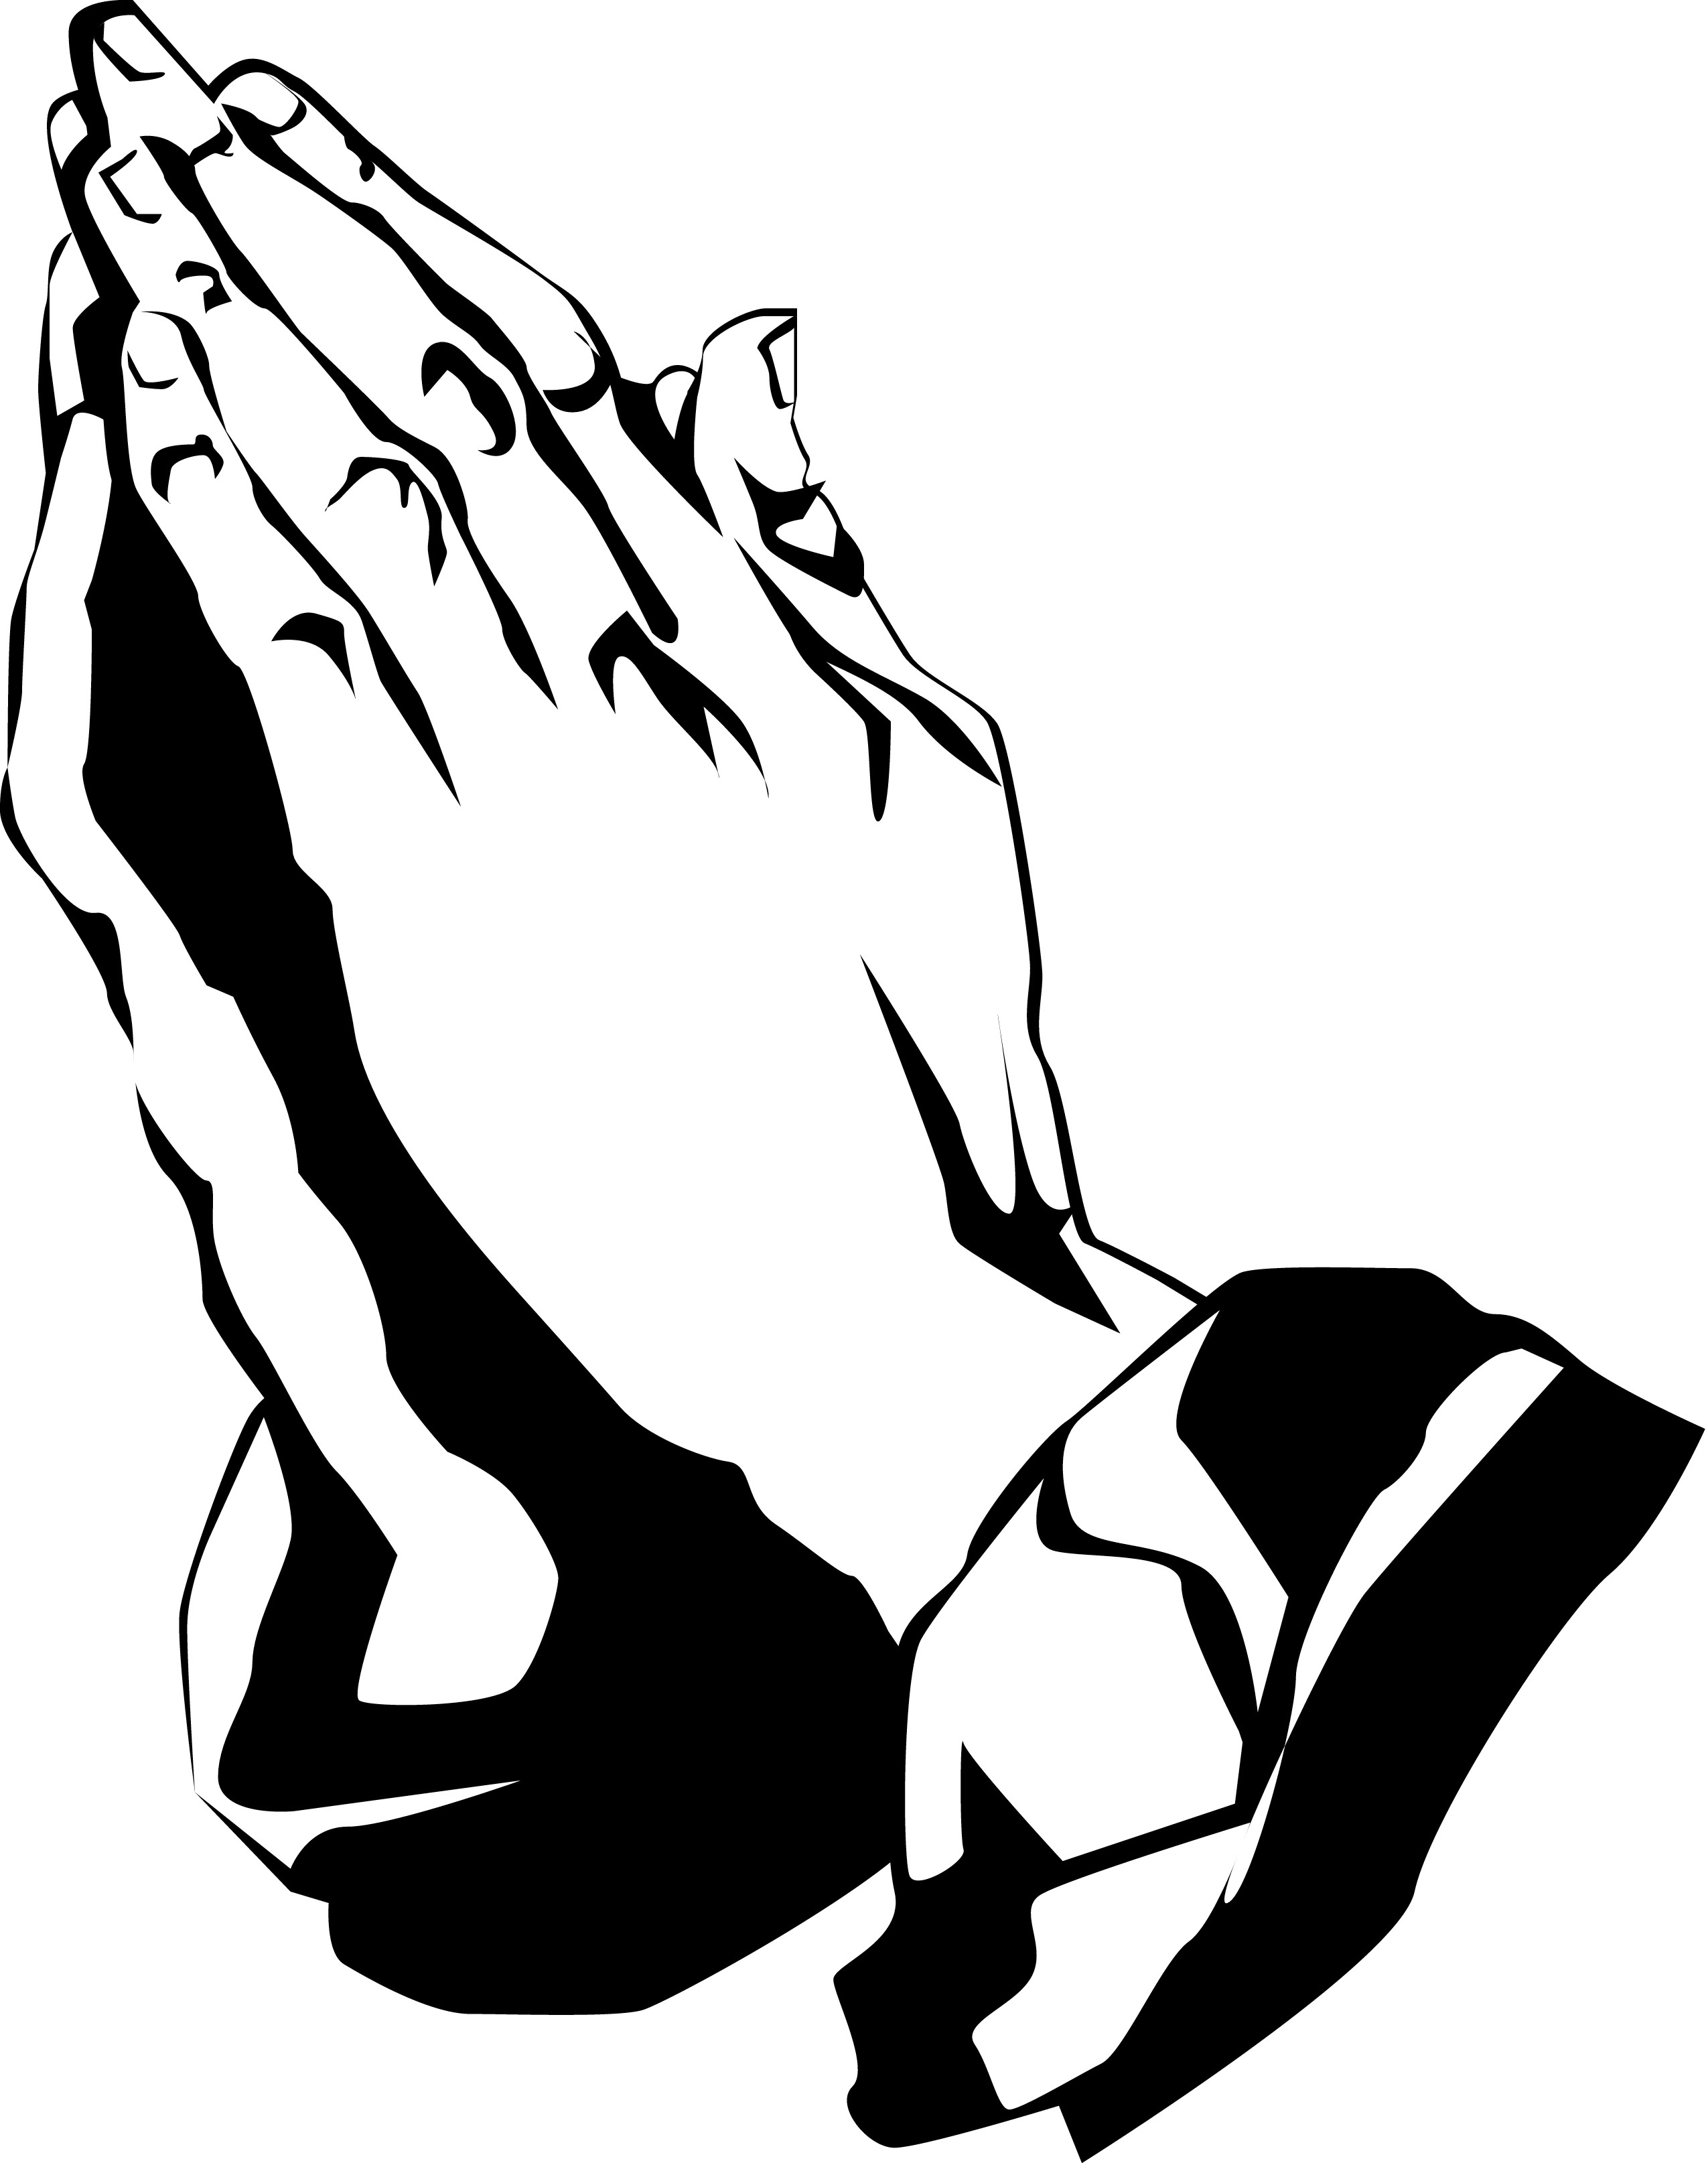 Praying Hands Drawing | Free download on ClipArtMag